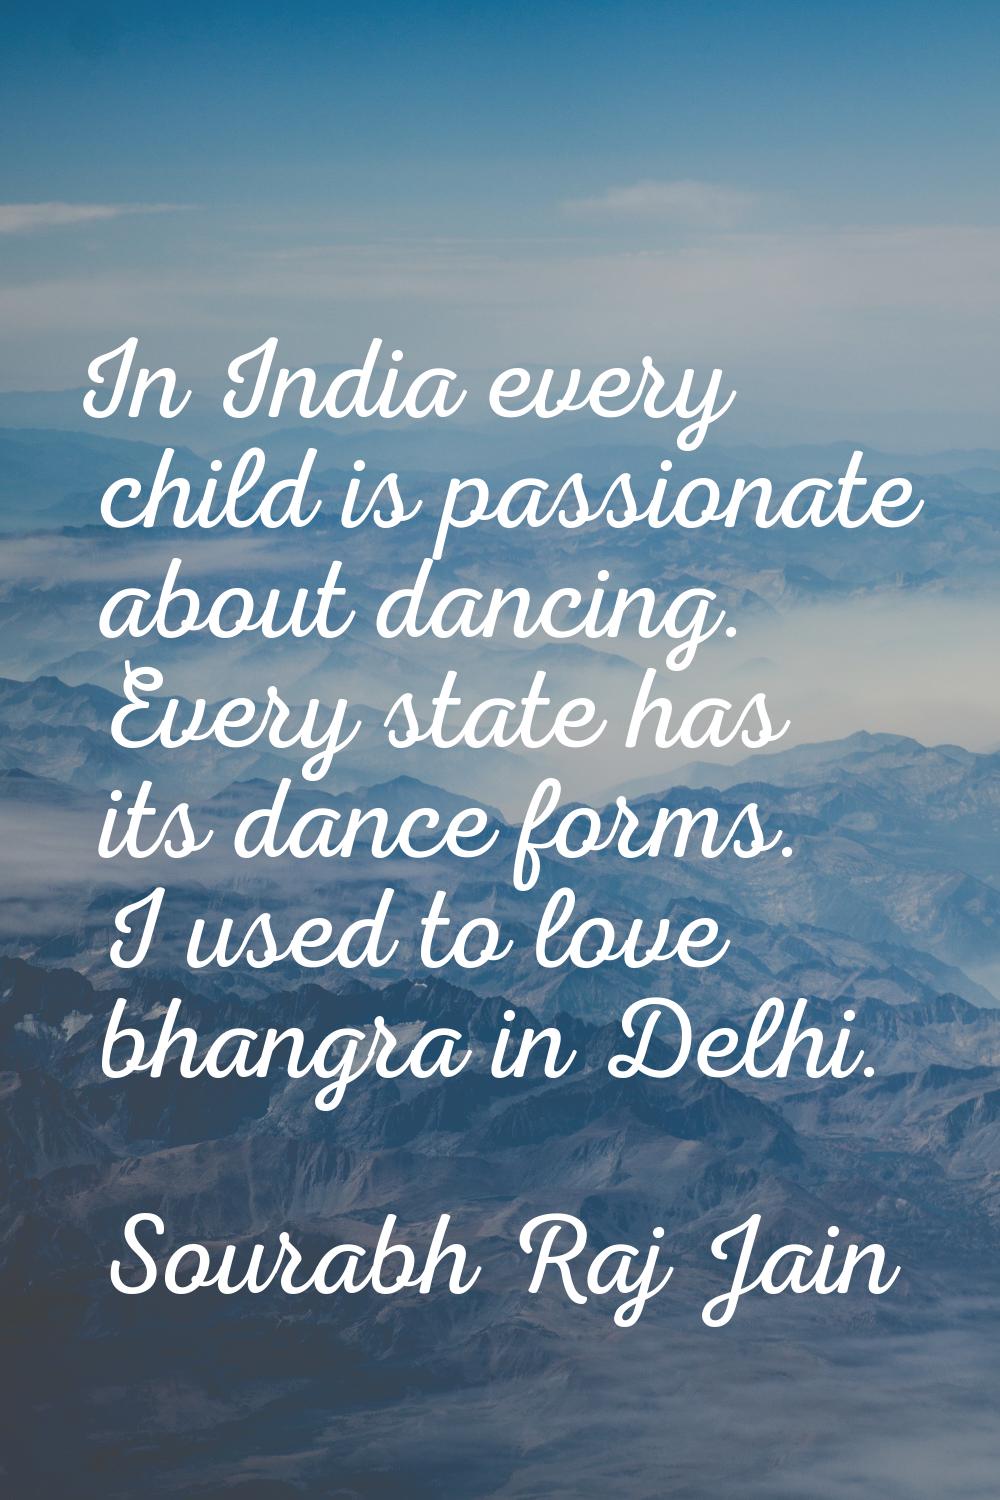 In India every child is passionate about dancing. Every state has its dance forms. I used to love b